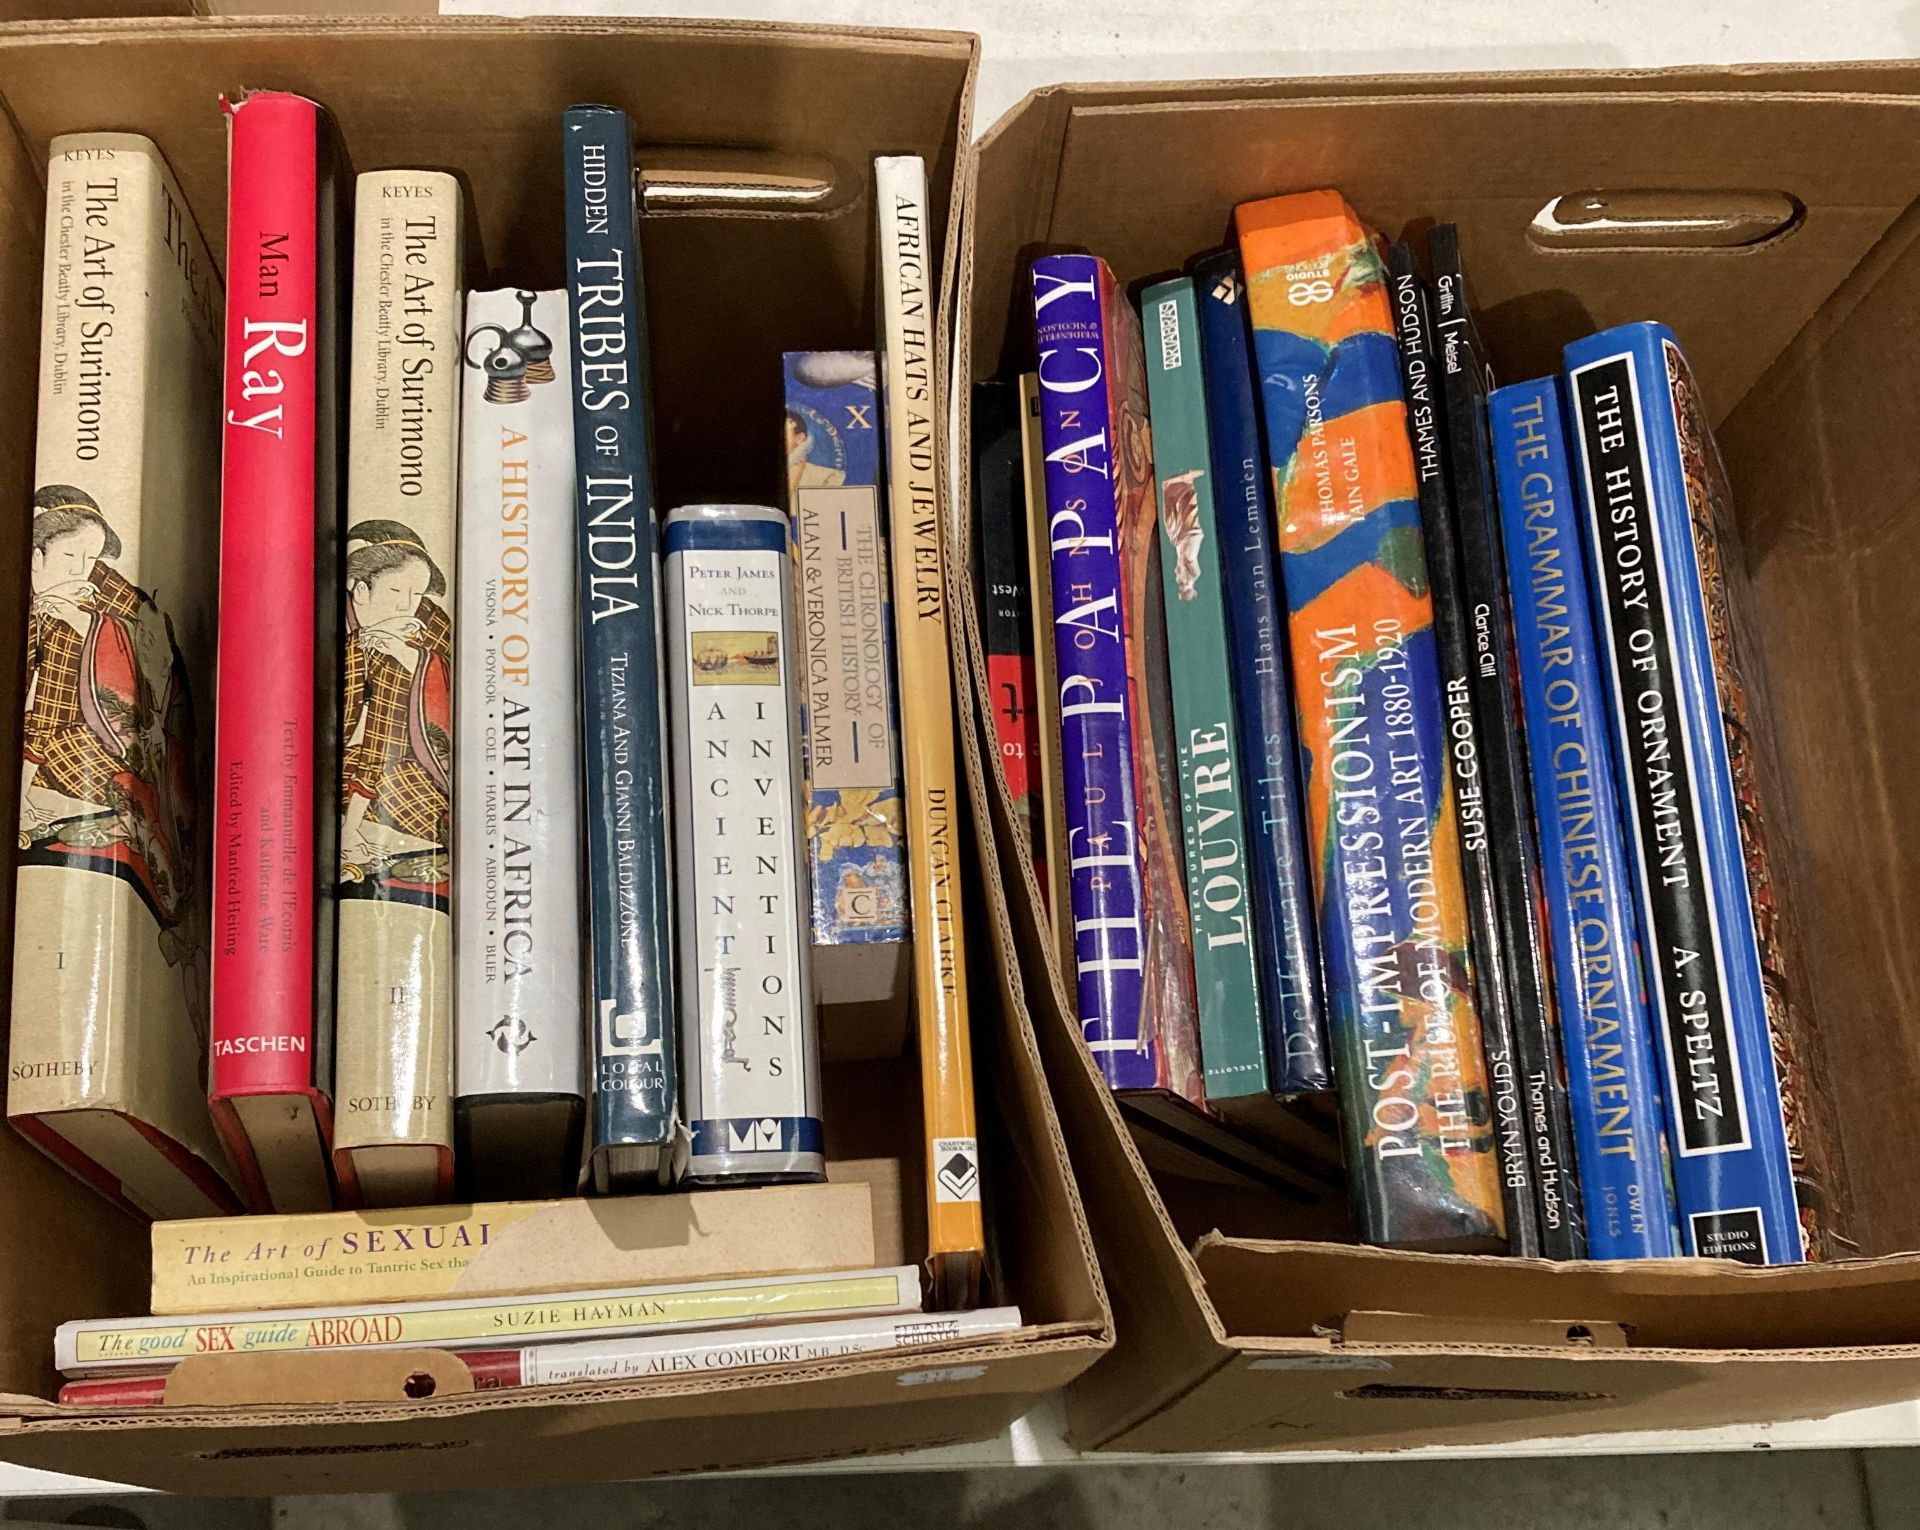 Contents to two boxes of books - approximately 21 assorted books on art, inventions, ornaments,